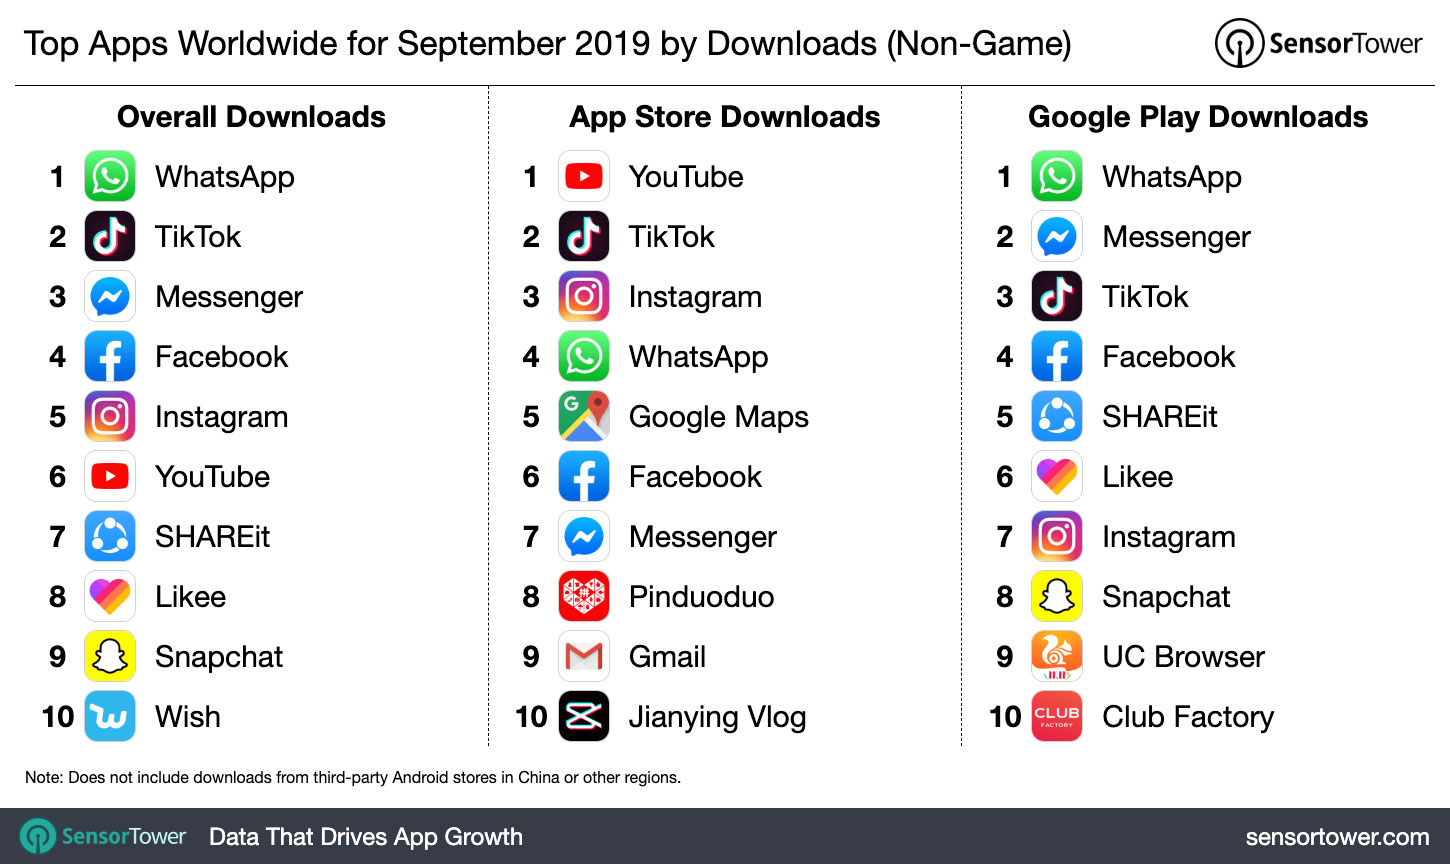 Top Apps Worldwide for September 2019 by Downloads